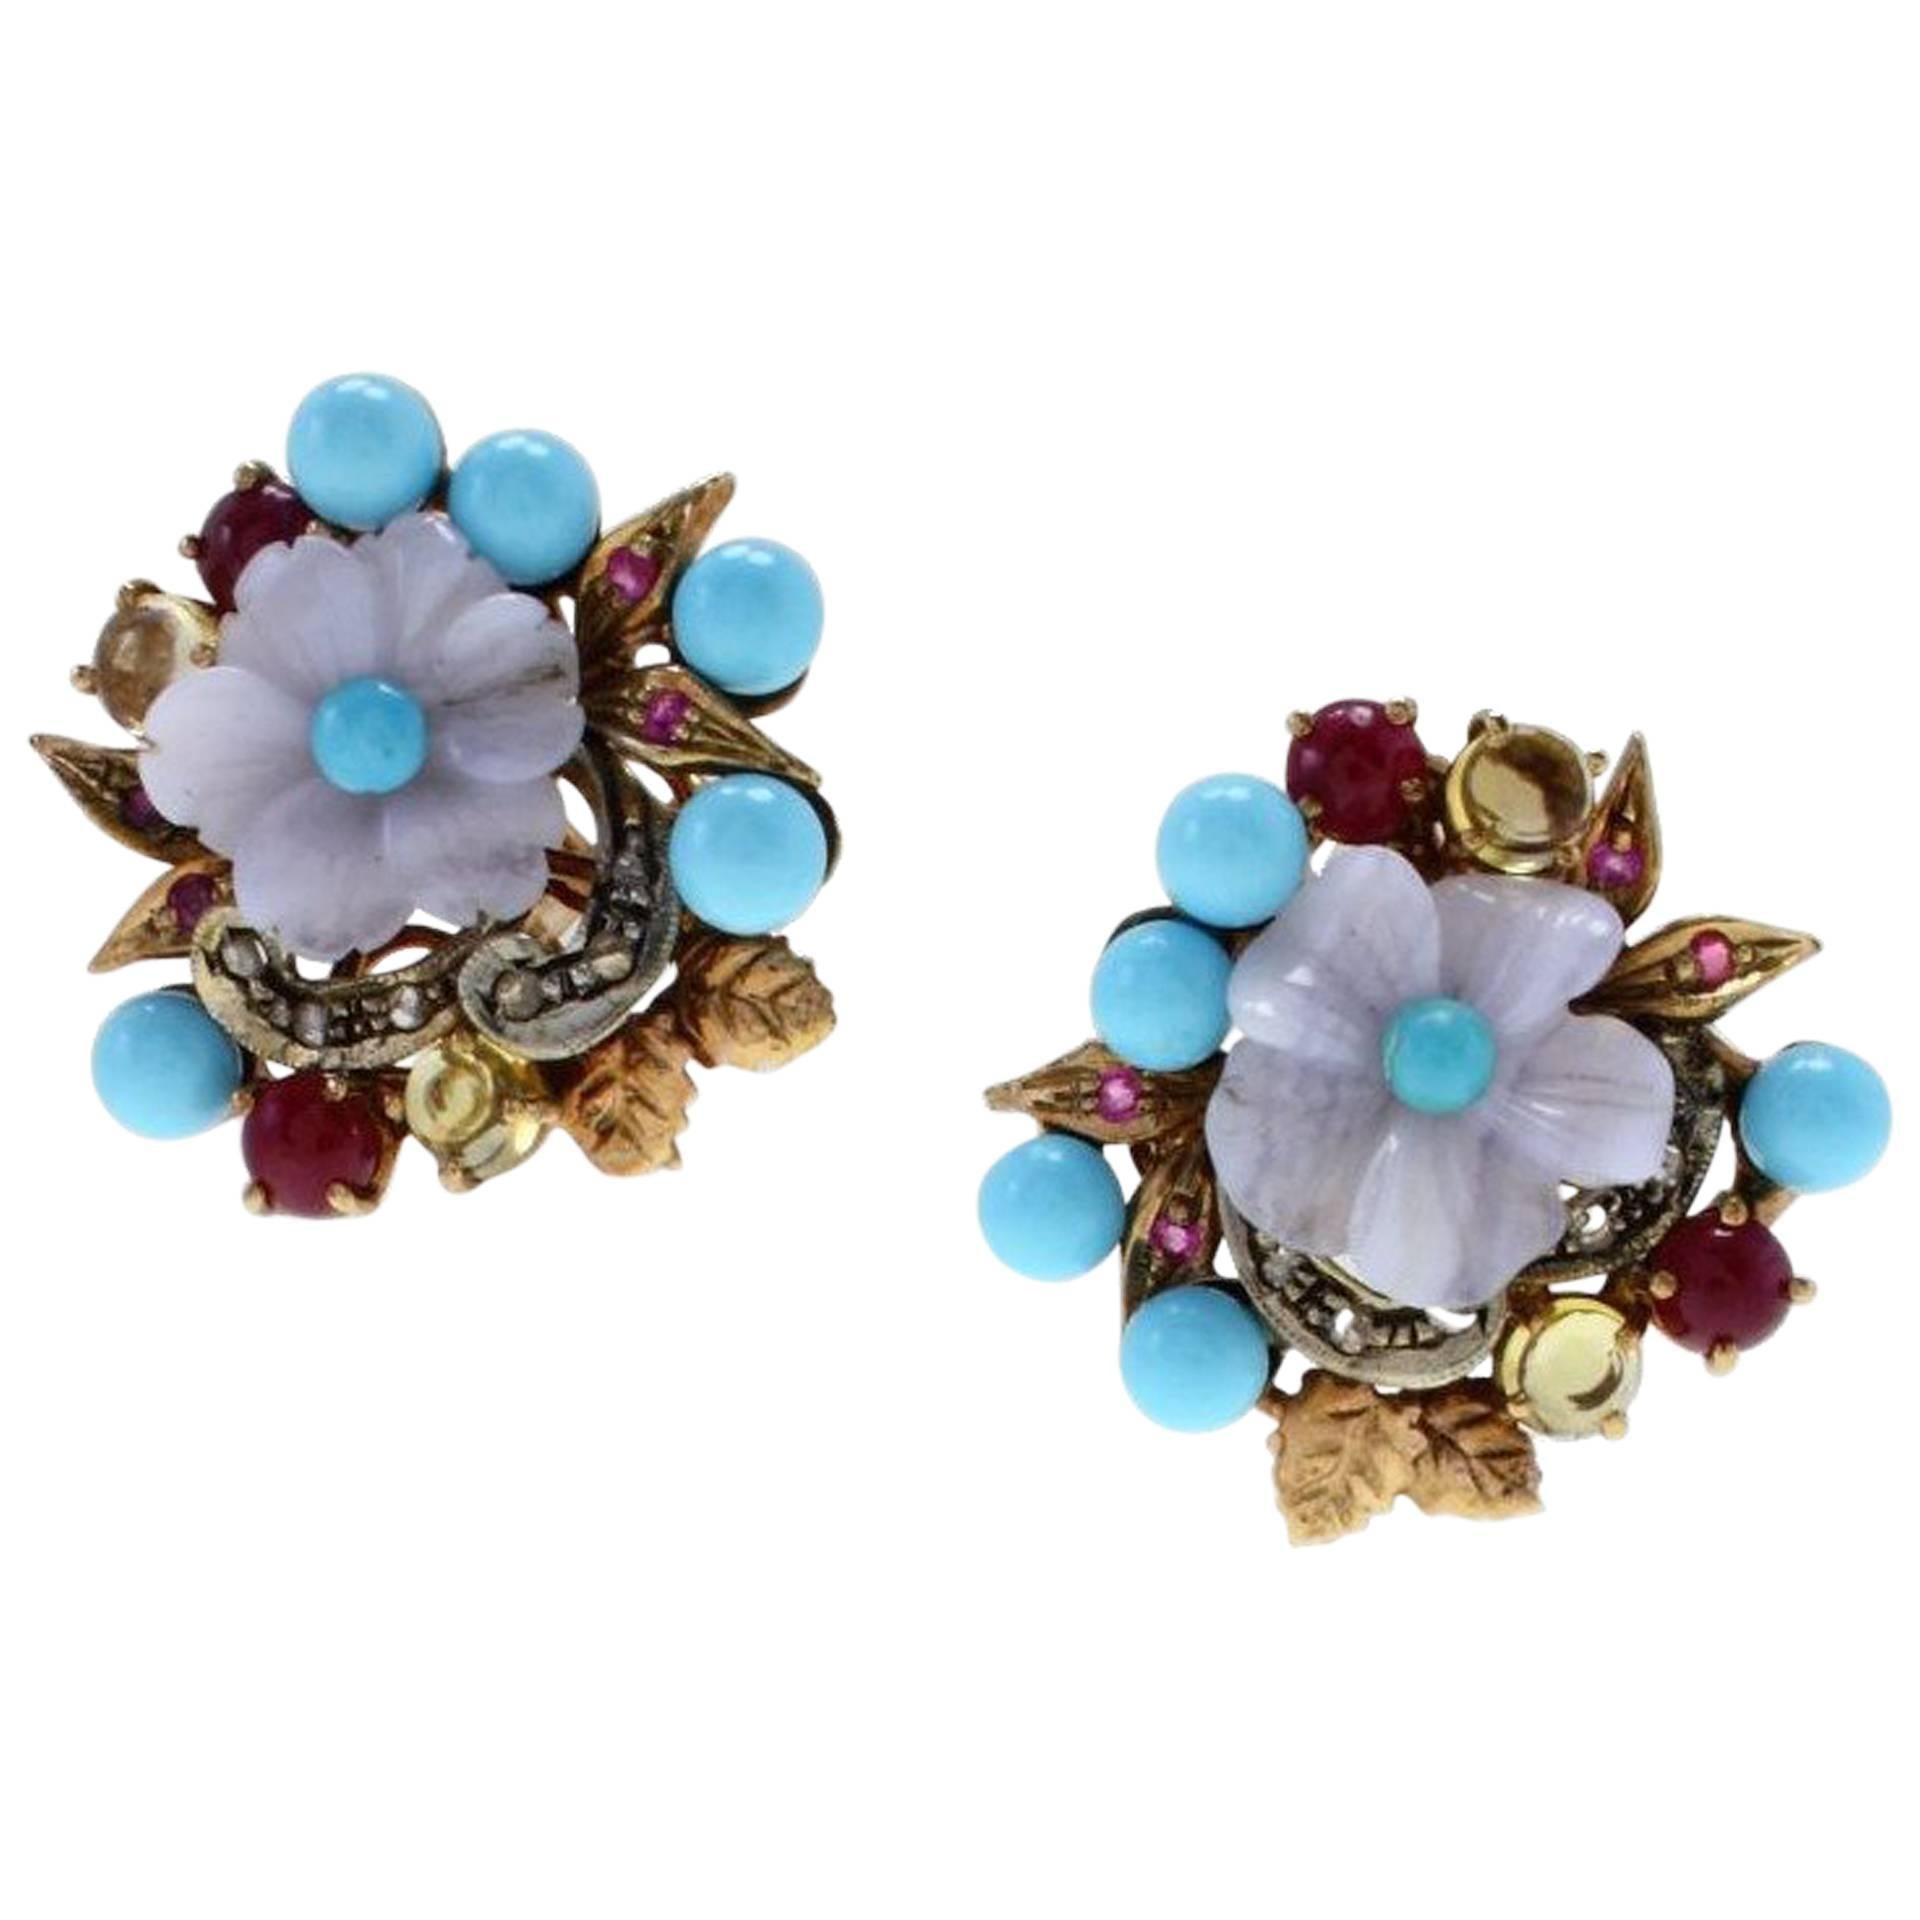 Classic and elegant earrings in 9Kt gold and silver, with a flower shaped stone  adorned with turquoise, rubies and yellow topaz and diamonds.
turquoise (1.83gr) 
topaz(2.42Kt)
diamonds(0.15Kt) Tot weight 10.3gr
ref  79803